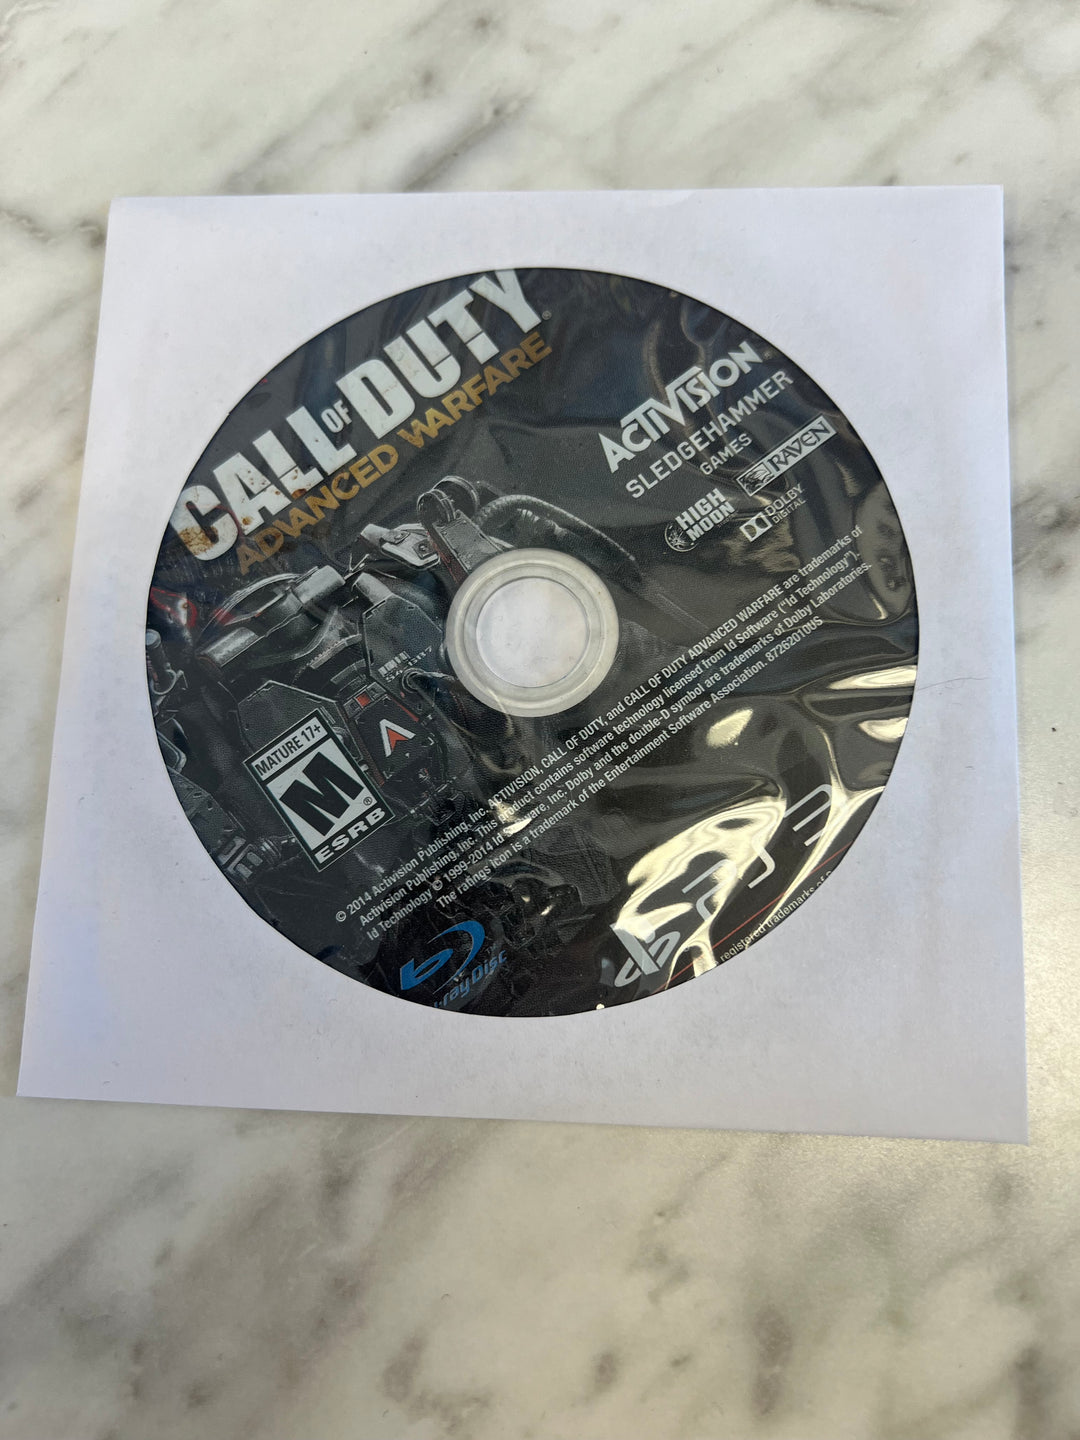 Call of Duty Advanced Warfare for PS3 Playstation 3 Disc Only No Case/Manual DU62724